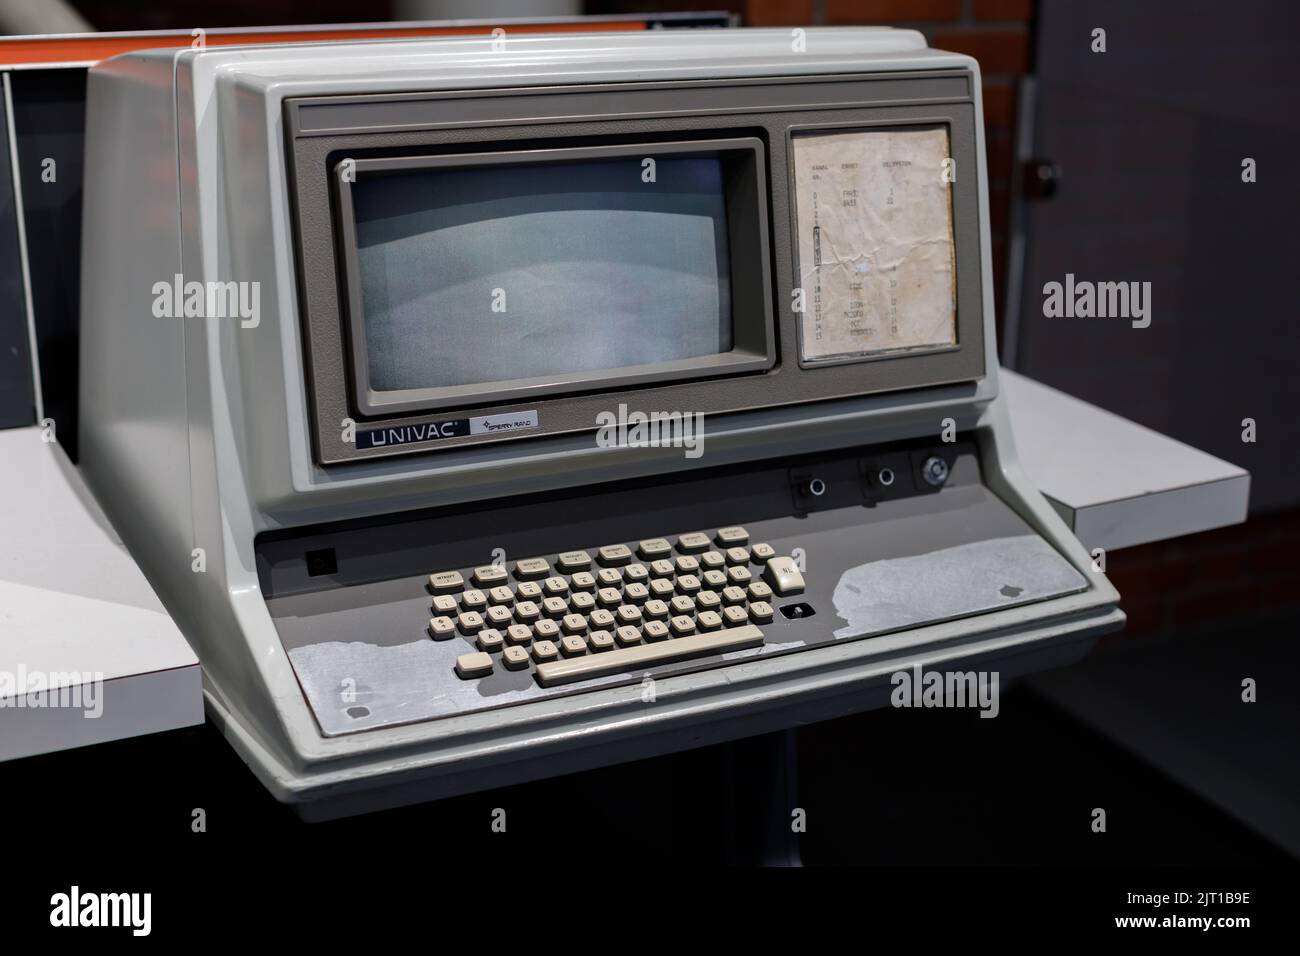 Oslo, Norway. May 01, 2022: Vintage UNIVAC (Sperry Rand) 1970s computer at the Oslo Museum of Technology.v Stock Photo